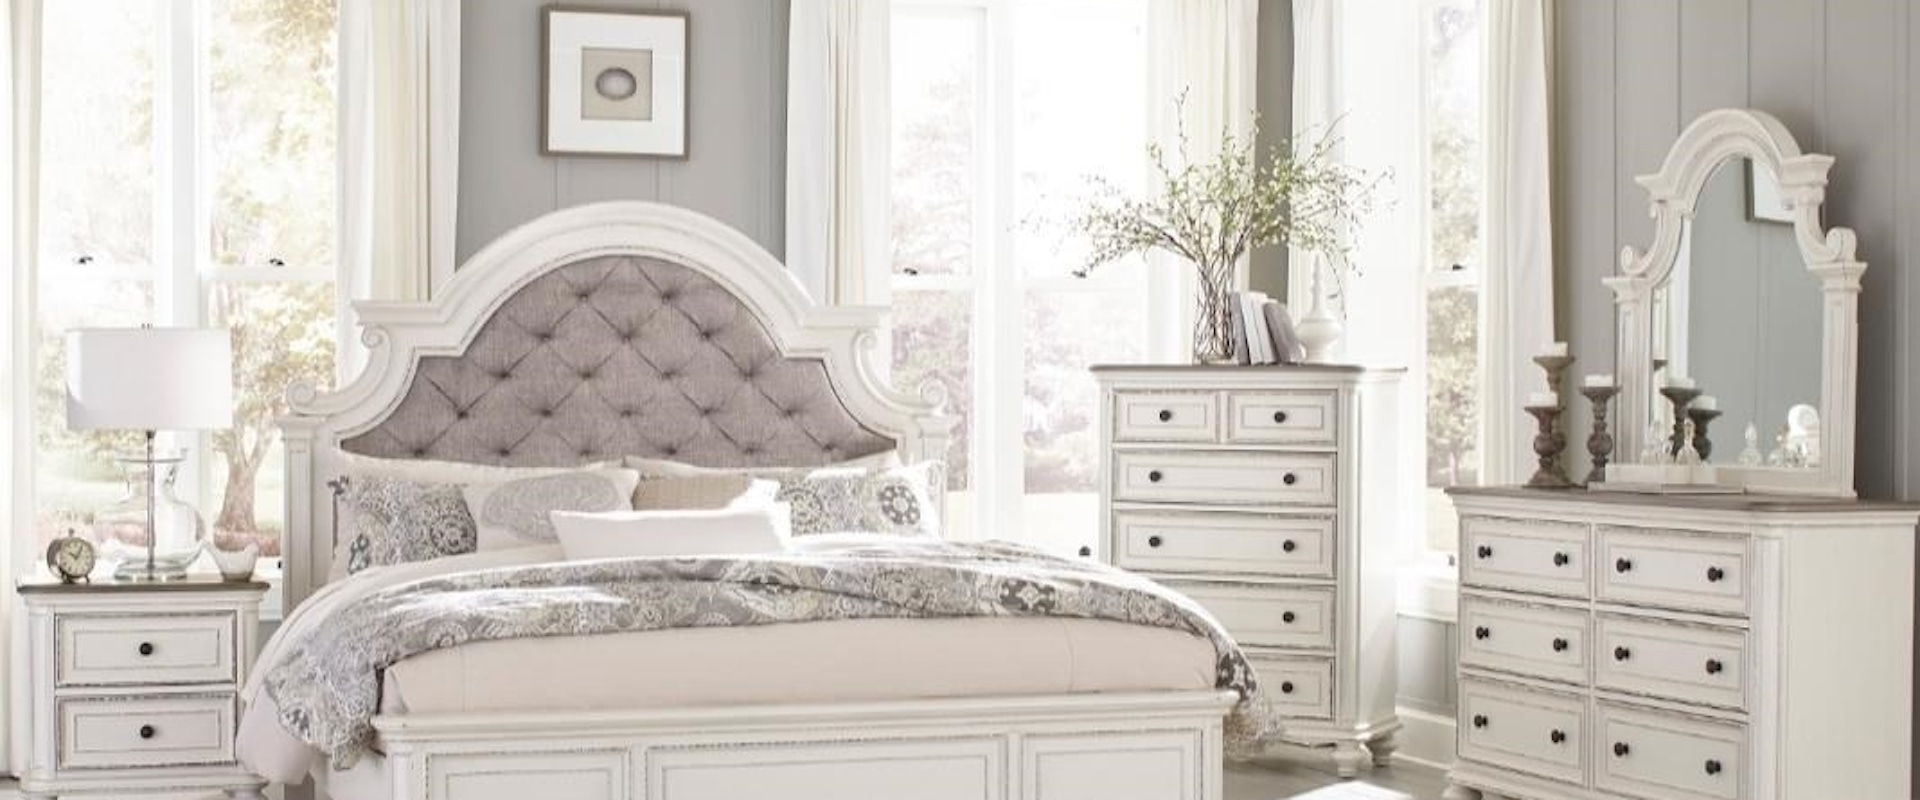 Antique White King Bedroom Group 2